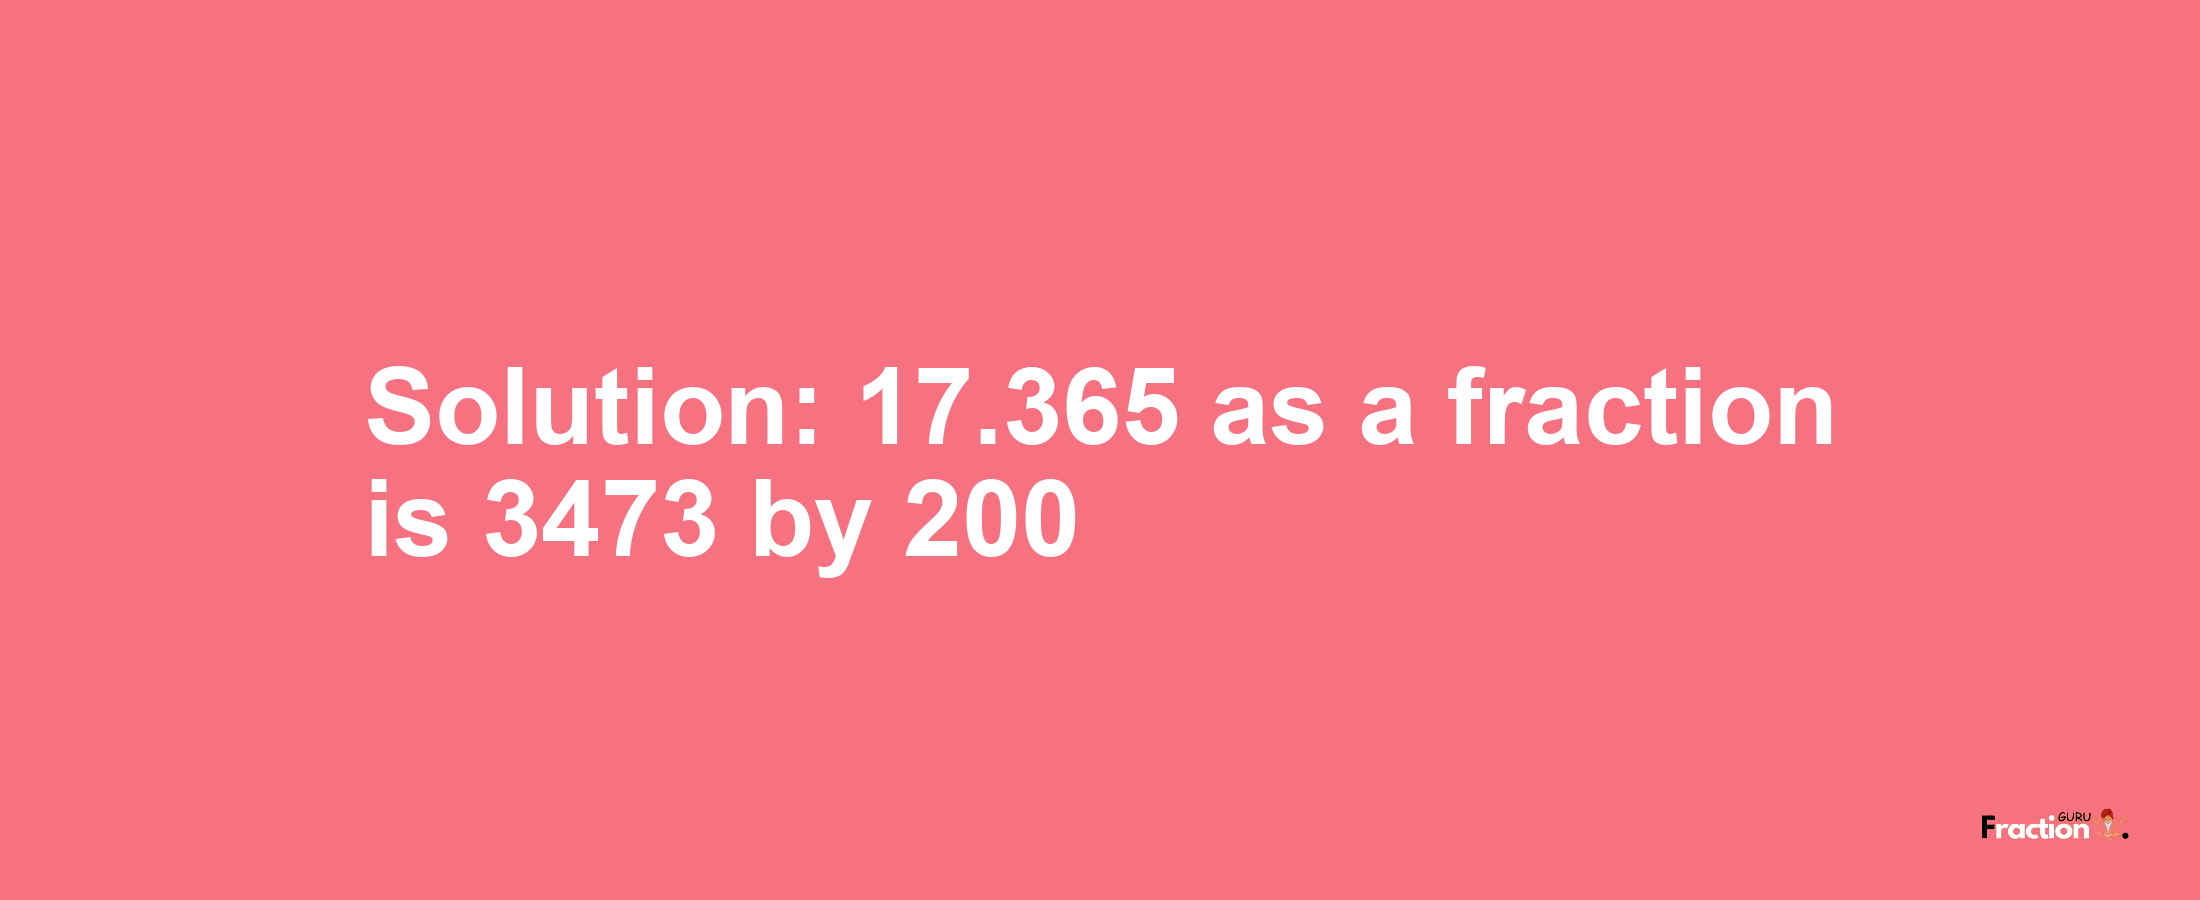 Solution:17.365 as a fraction is 3473/200